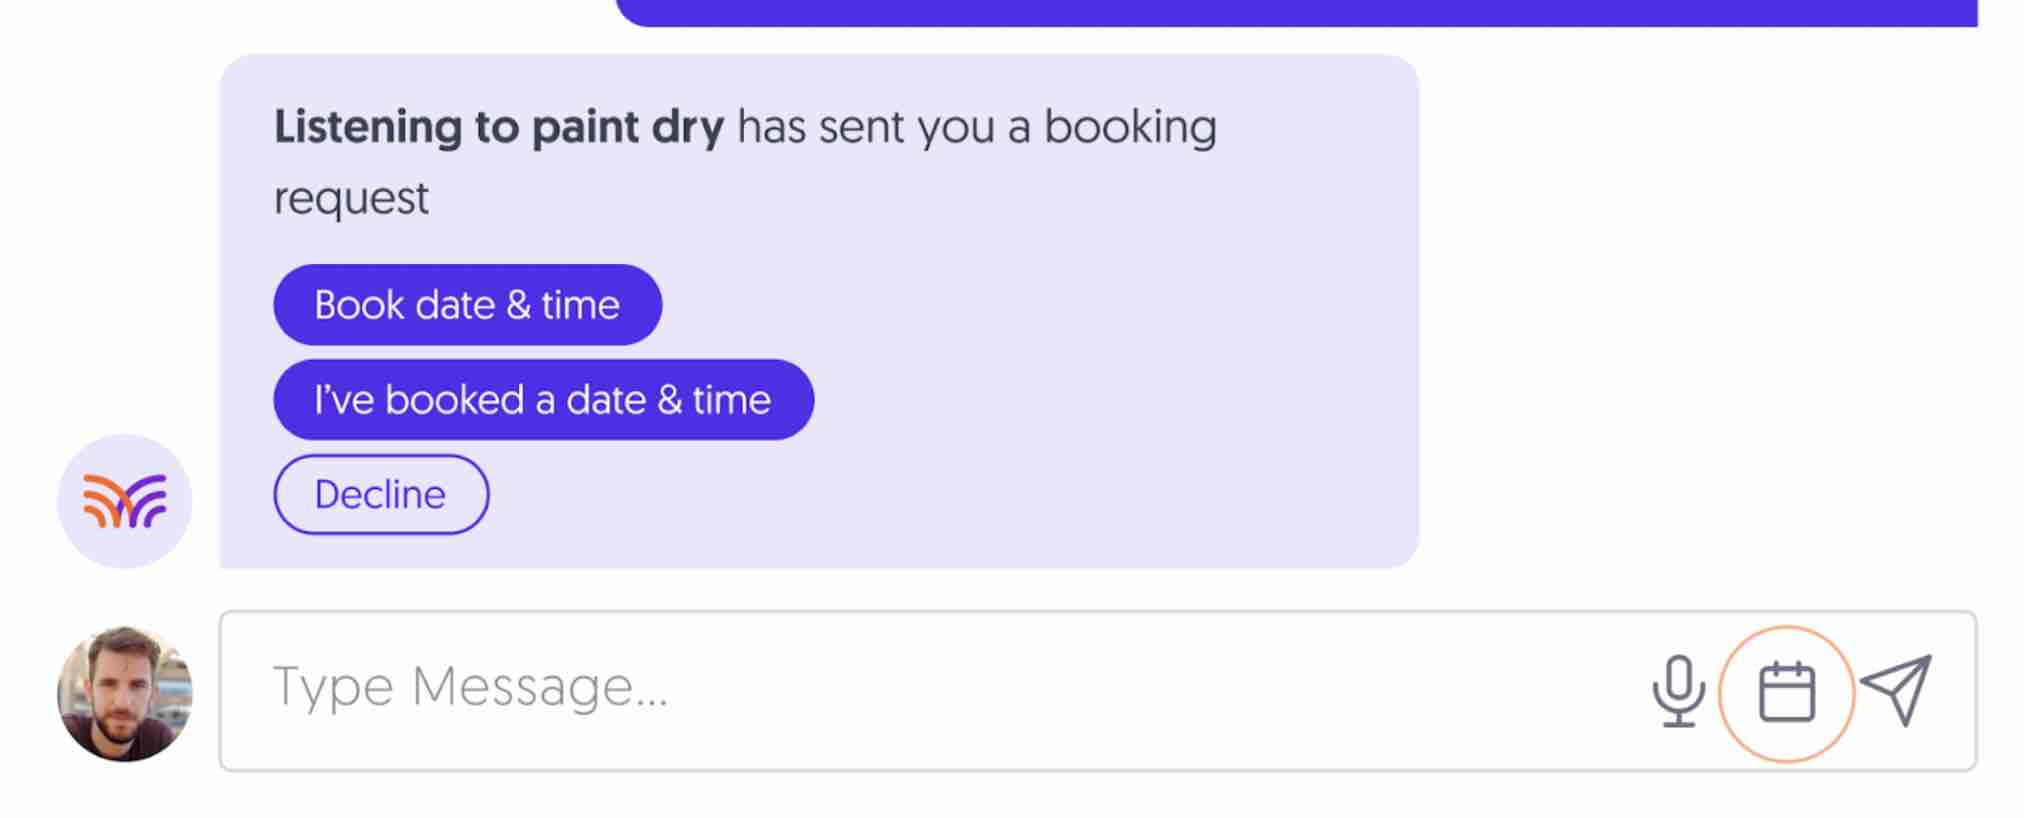 Using MatchMaker’s Conversational Booking & Feedback Features